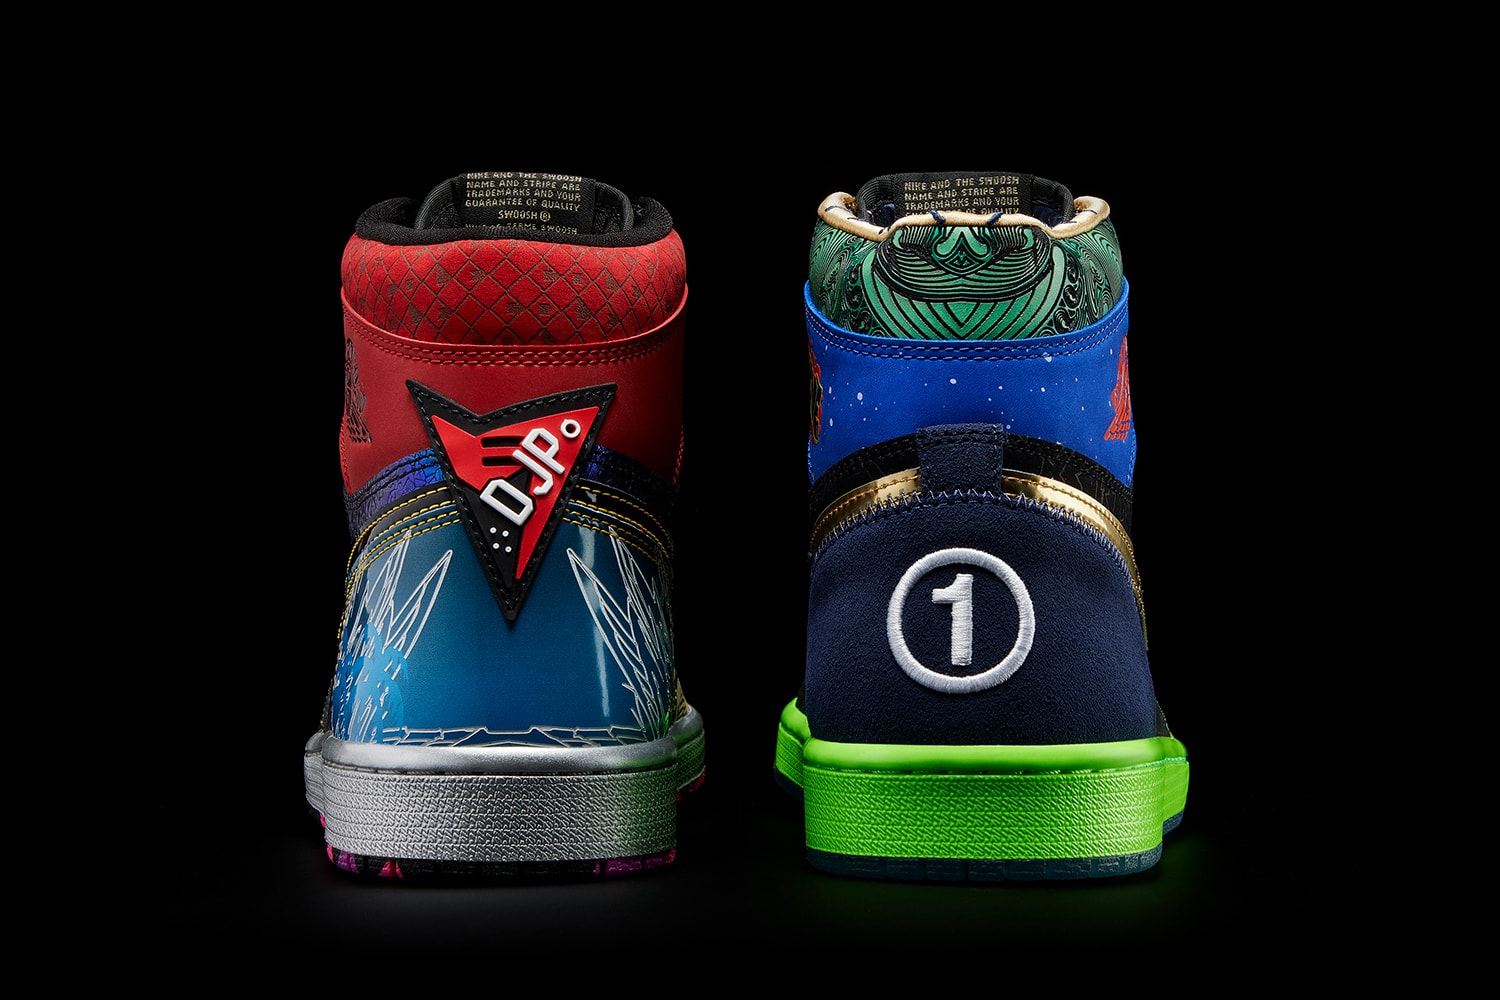 Nike Doernbecher Freestyle Air Jordan 1 Retro High OG What The Official Look Release Info Buy Price 